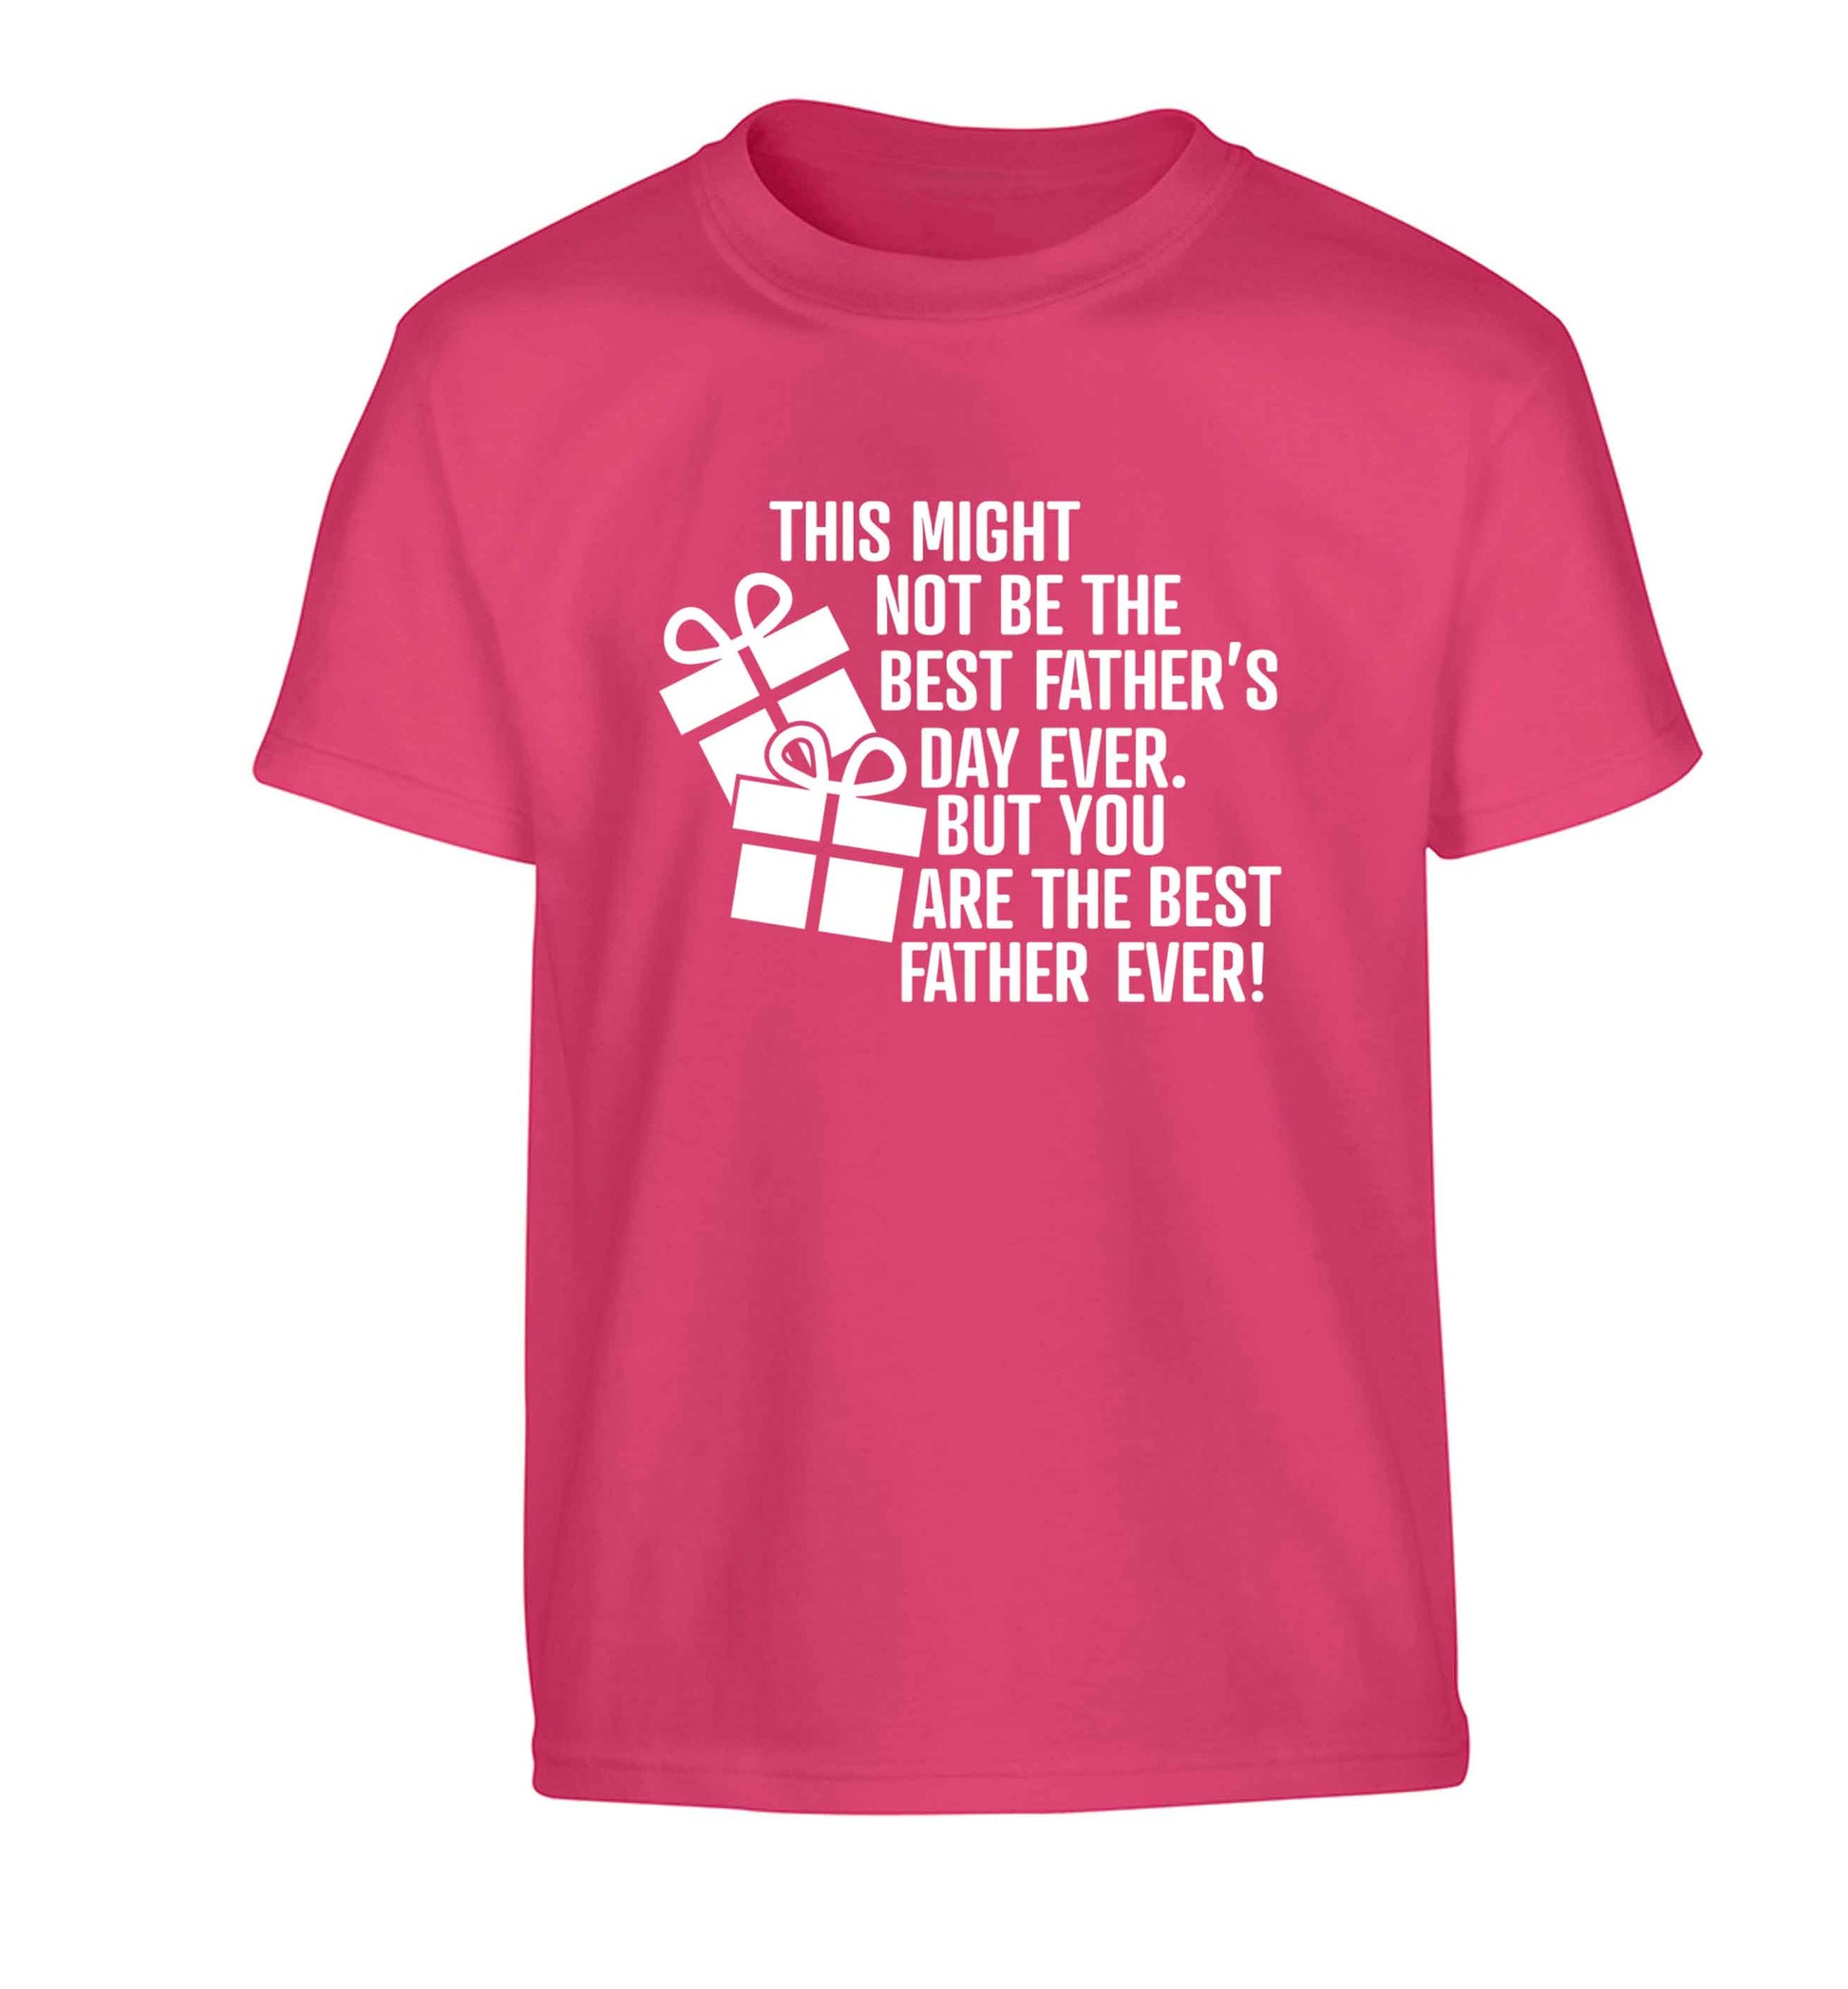 It might not be the best Father's Day ever but you are the best father ever! Children's pink Tshirt 12-13 Years